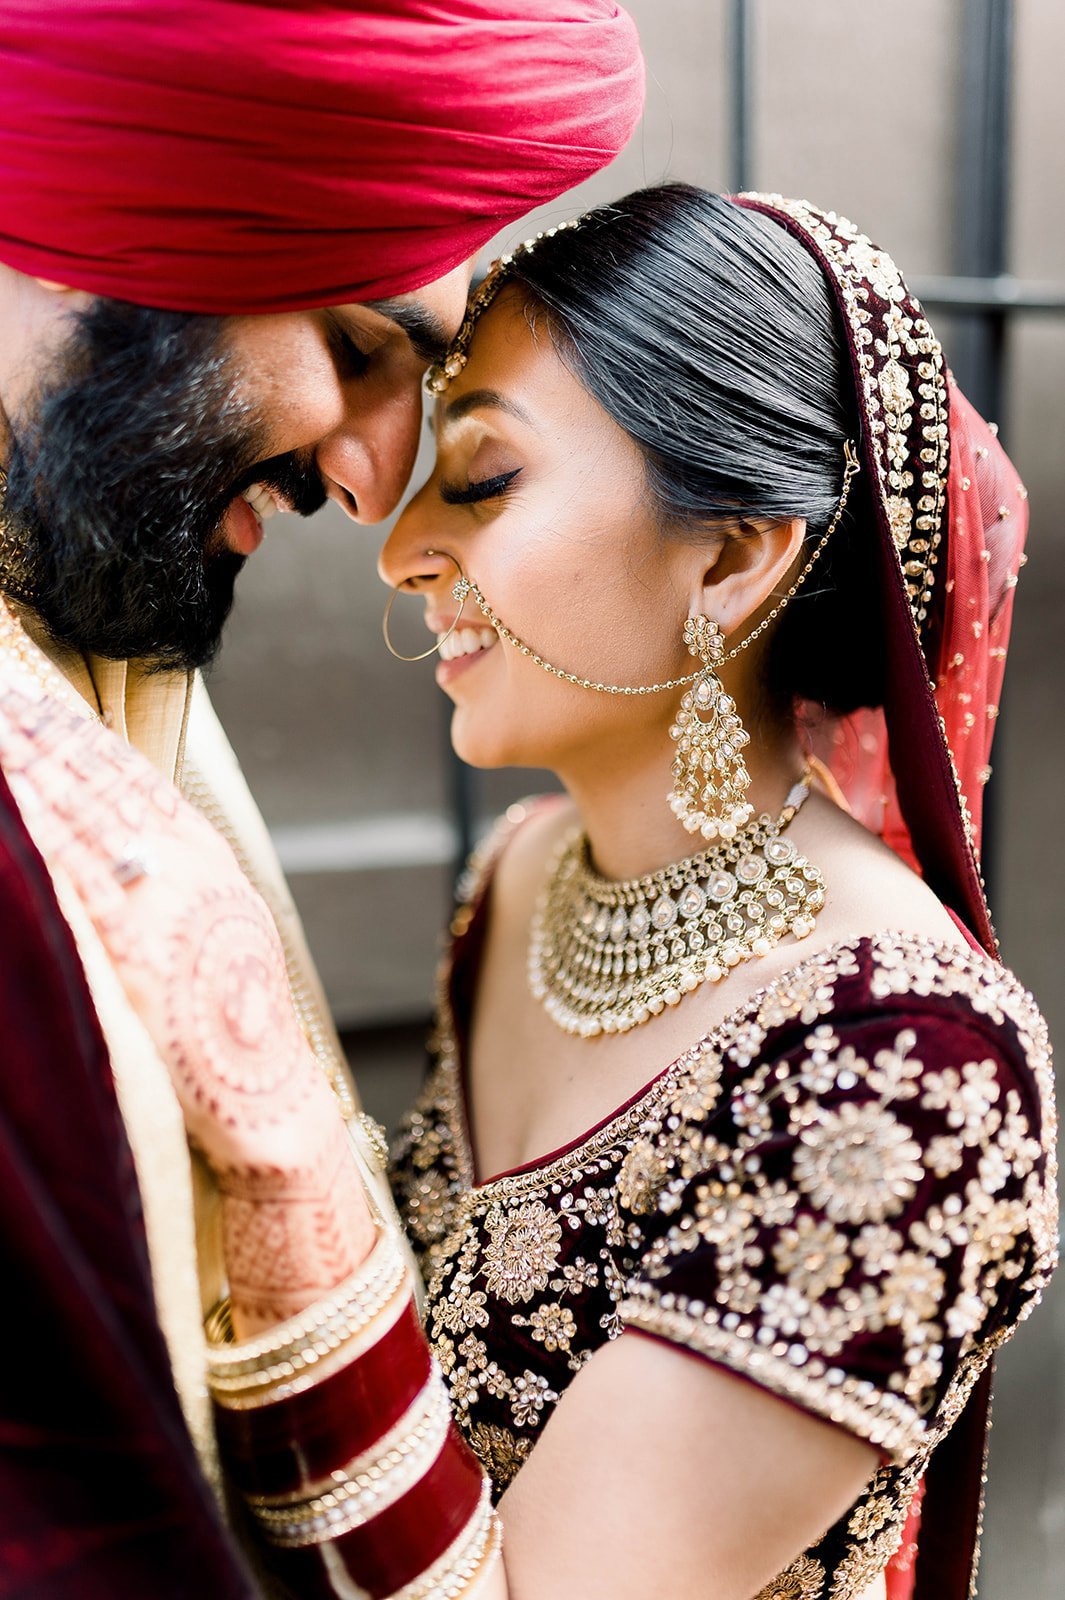 A bride and groom rest their heads together in a cuddly moment.